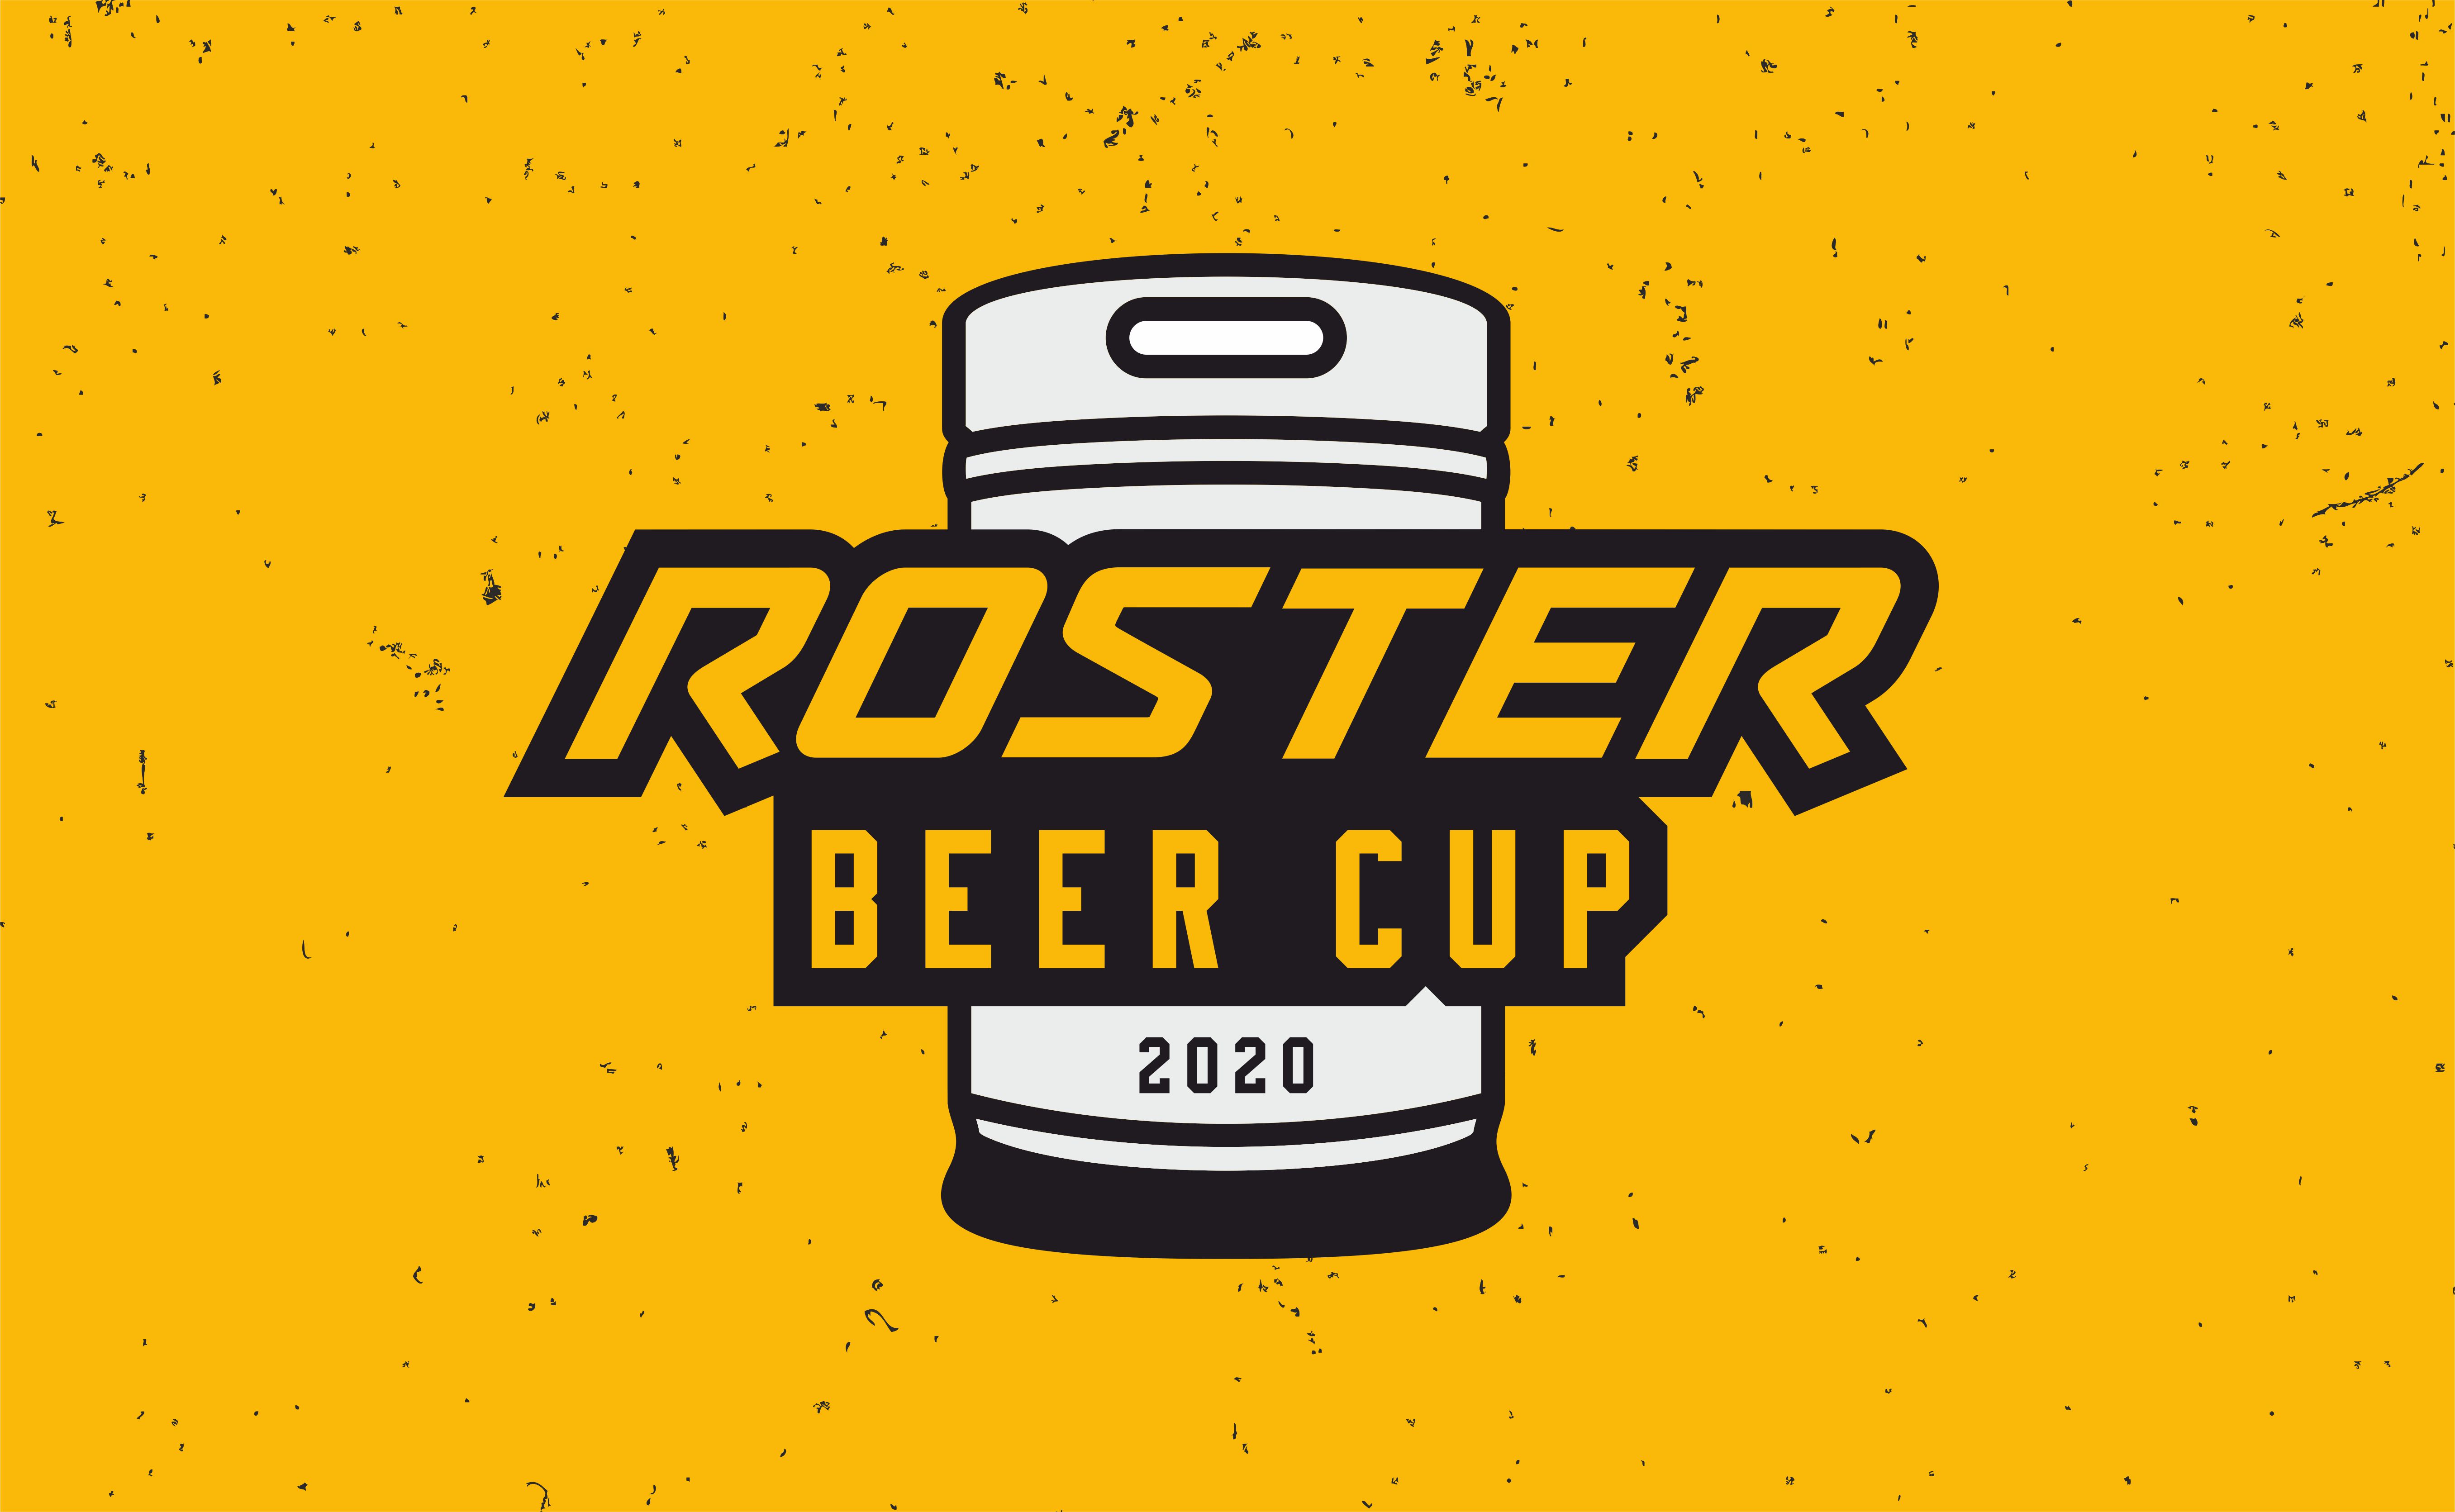 ROSTER CUP 2020 LOGO